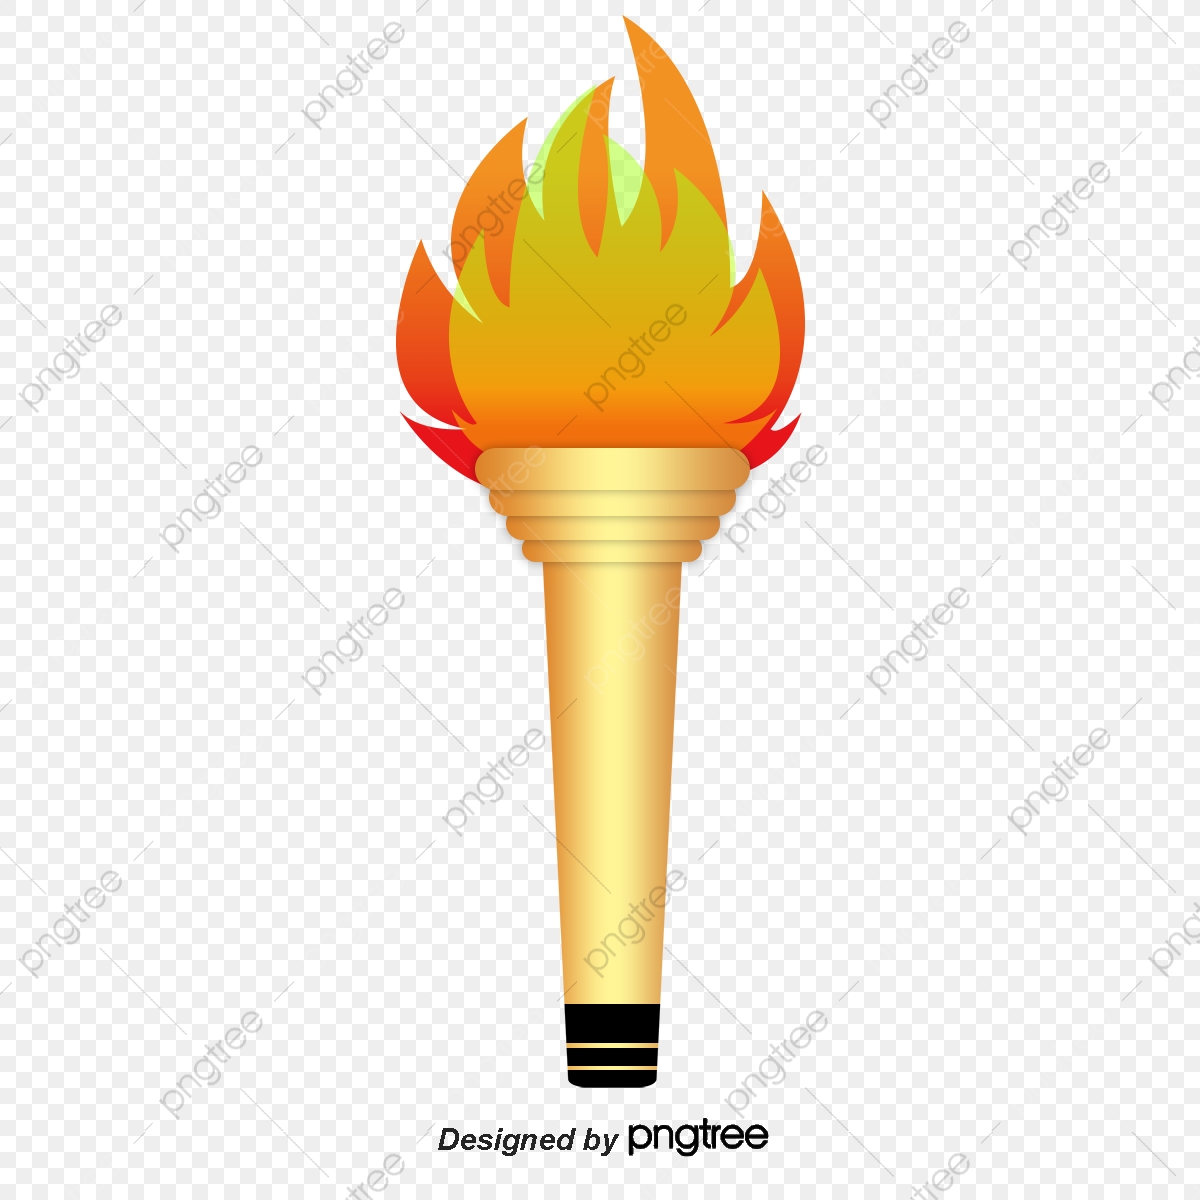 torch clipart file